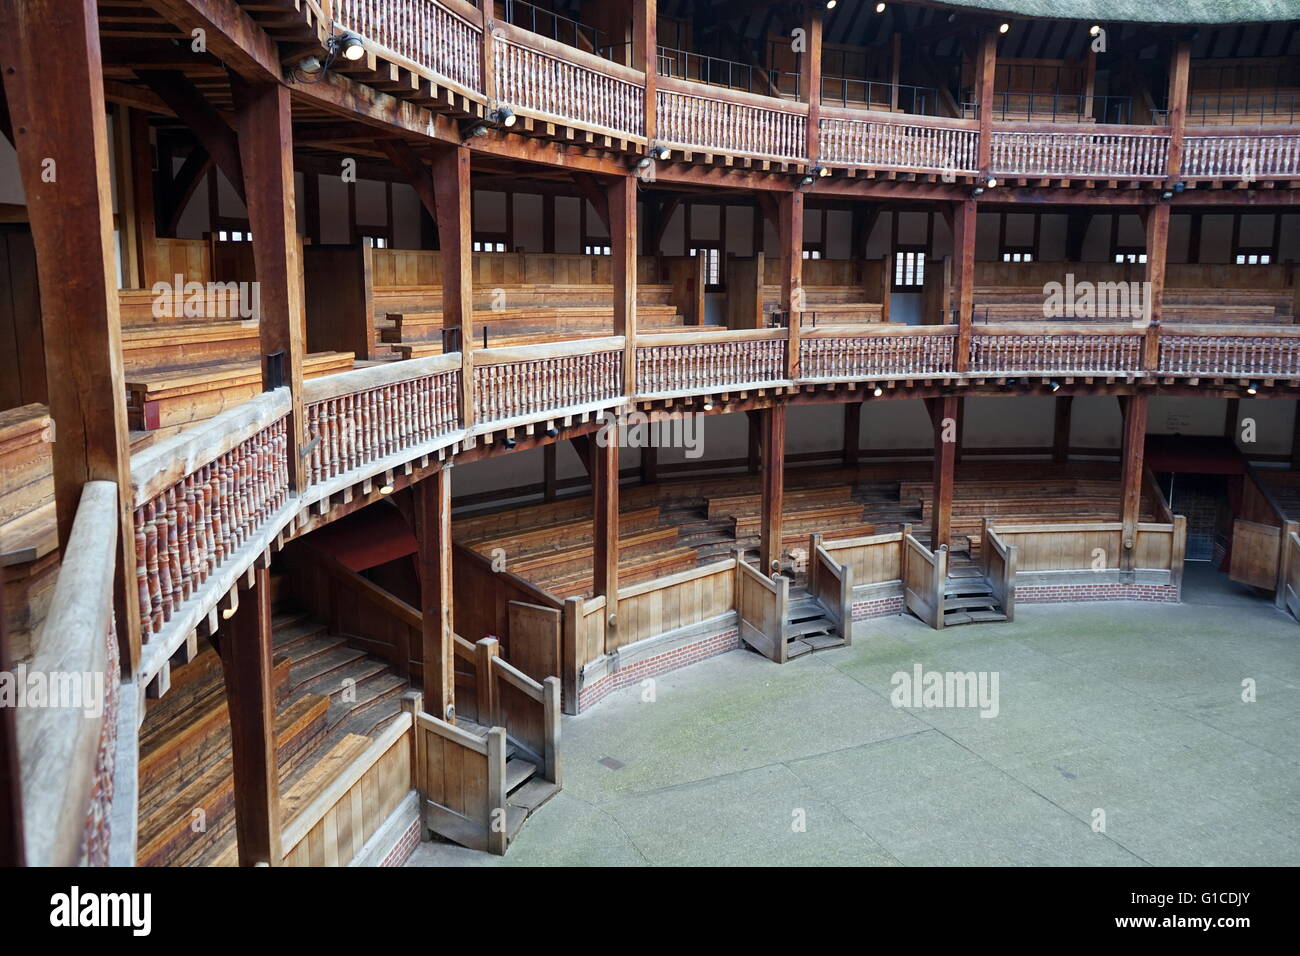 Interior of the Globe Theatre London, associated with William Shakespeare. Built in 16th Century by Shakespeare's playing company, the Lord Chamberlain's Men. London. Dated 2015 Stock Photo